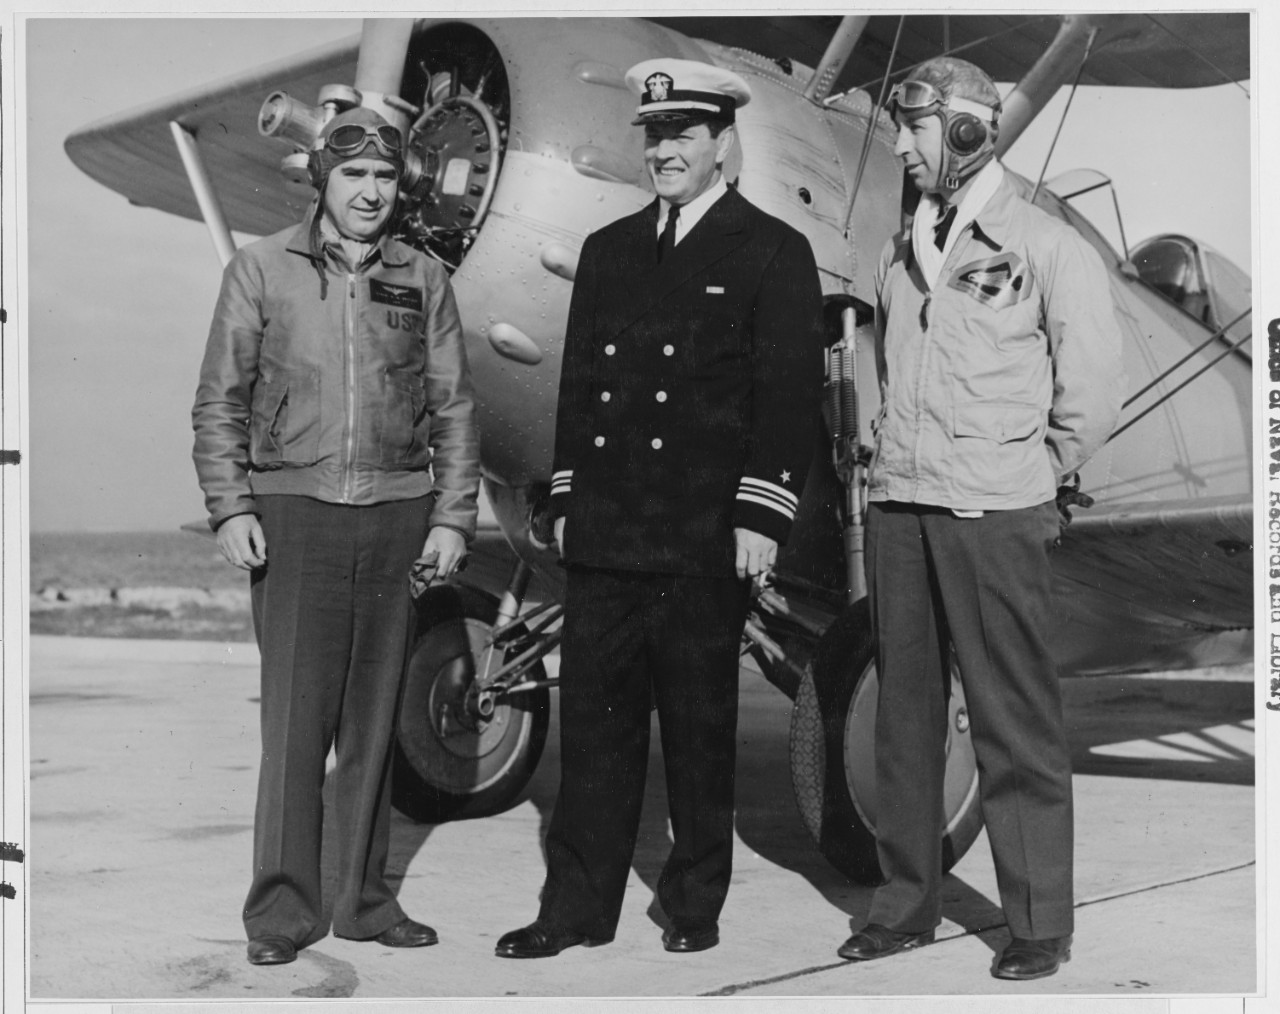 Comdr. W. G. Switzer, (left) Officer in charge, Aviation Cadet Regiment at the Naval Air Station Pensacola, Florida and Lt. Comdr D.D. Wilcox, (center) officer -in charge, Cadet regiment at the New Naval Air Station, Corpus Christi Texas, explains the finer points of flying to Lt. Comdr. J.J. (Gene) Tunney the Navy's new athletic director, at the Naval  Air Station, Pensacola, Fla.